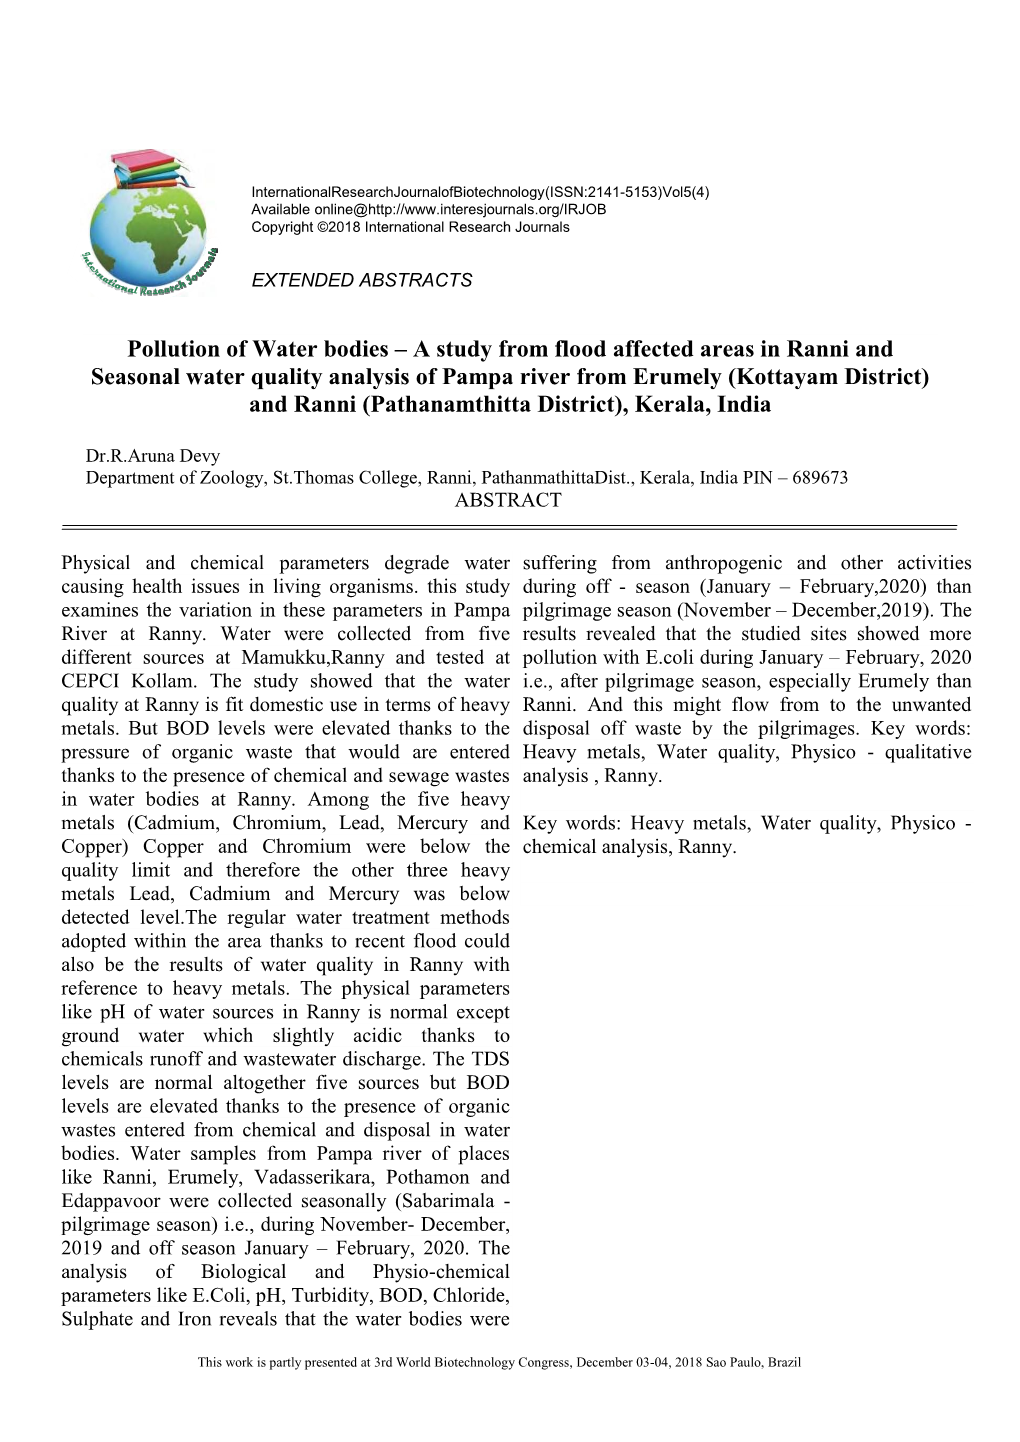 Pollution of Water Bodies – a Study from Flood Affected Areas in Ranni